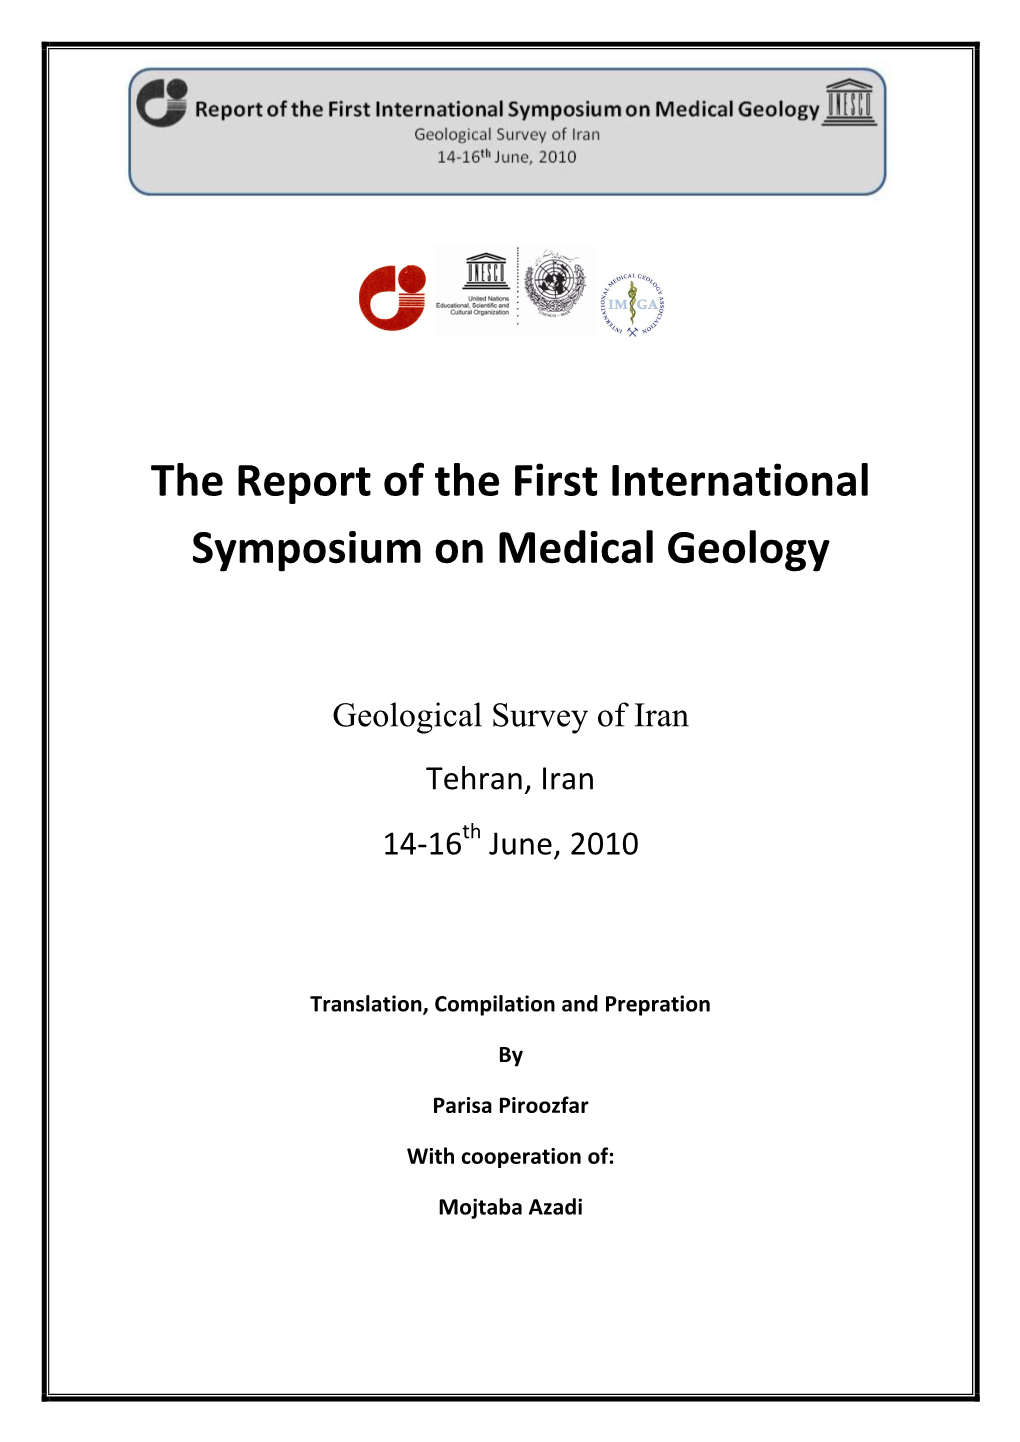 The Report of the First International Symposium on Medical Geology